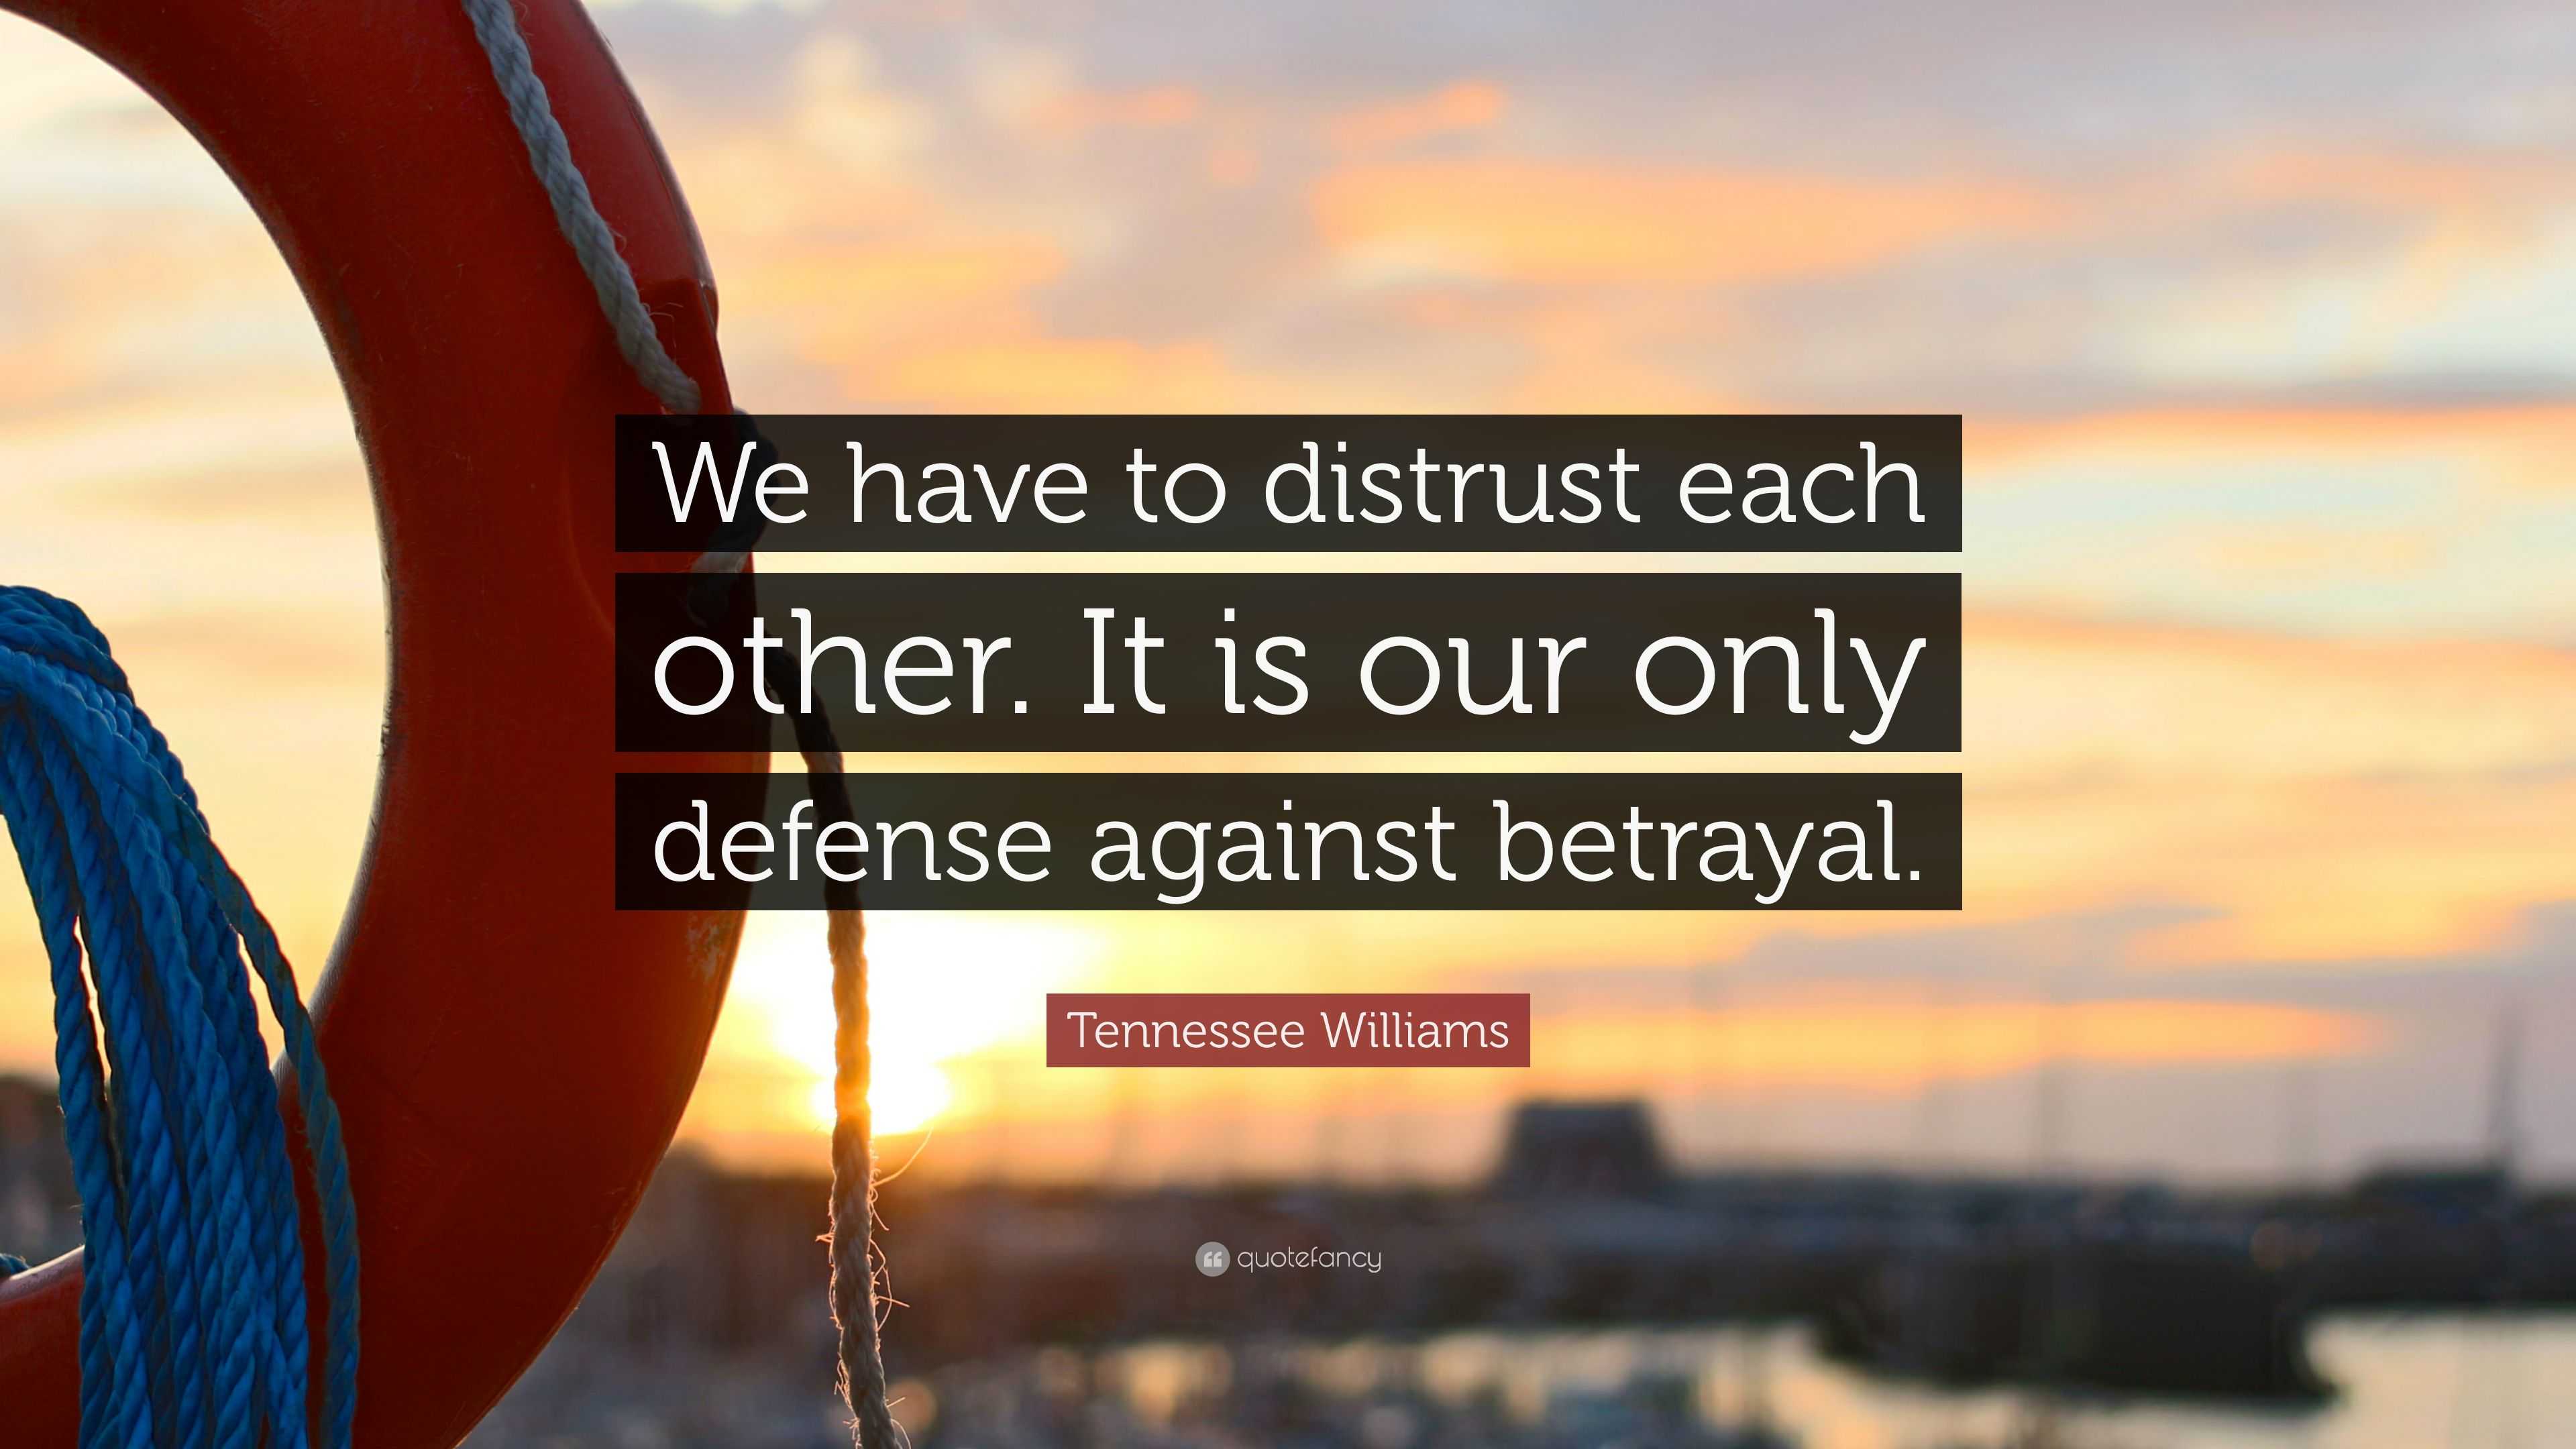 Tennessee Williams Quote: "We have to distrust each other ...